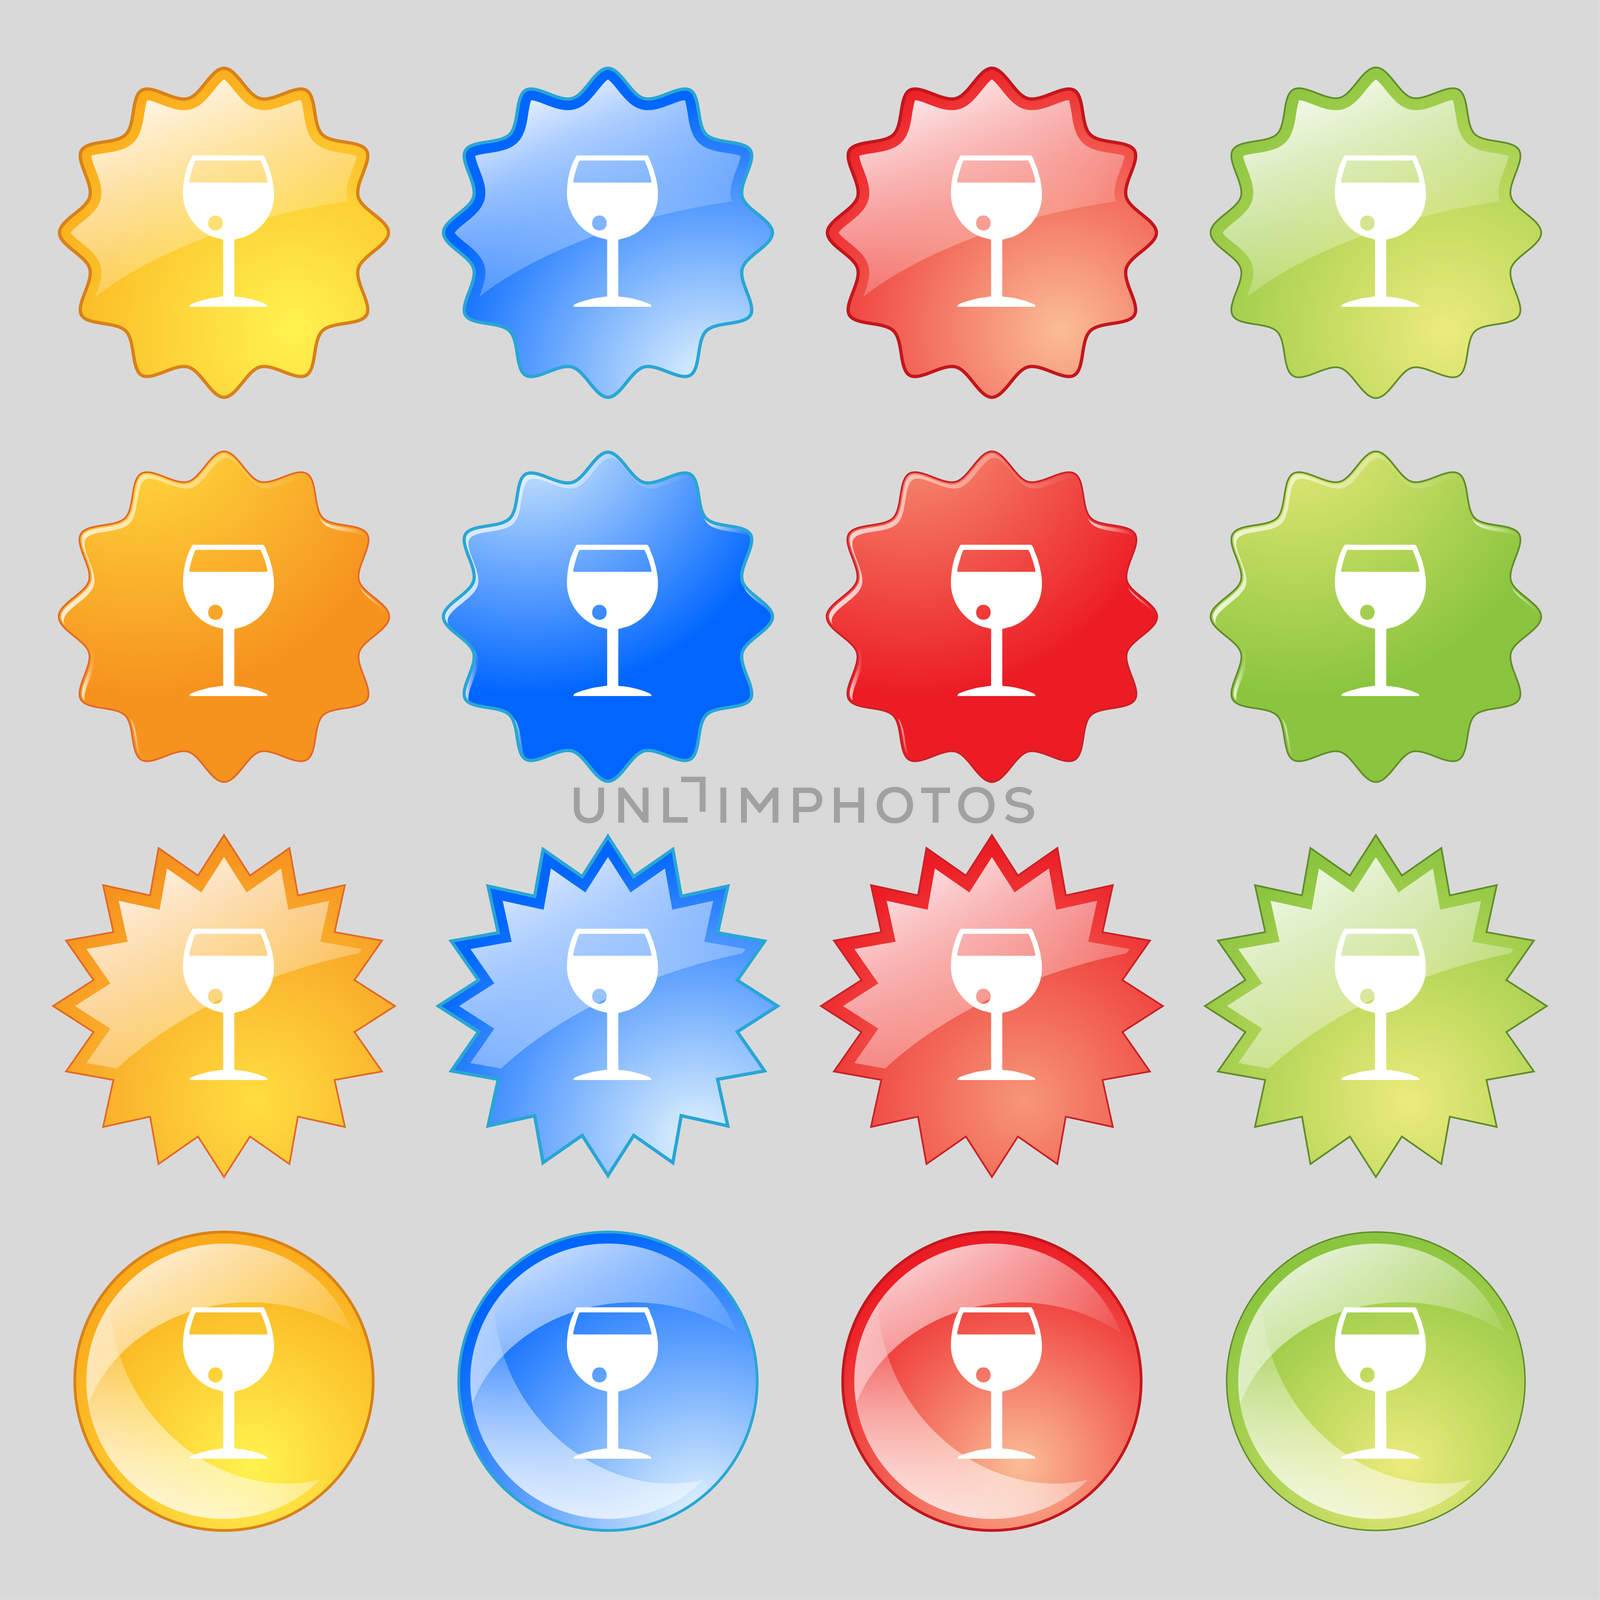 glass of wine icon sign. Big set of 16 colorful modern buttons for your design. illustration